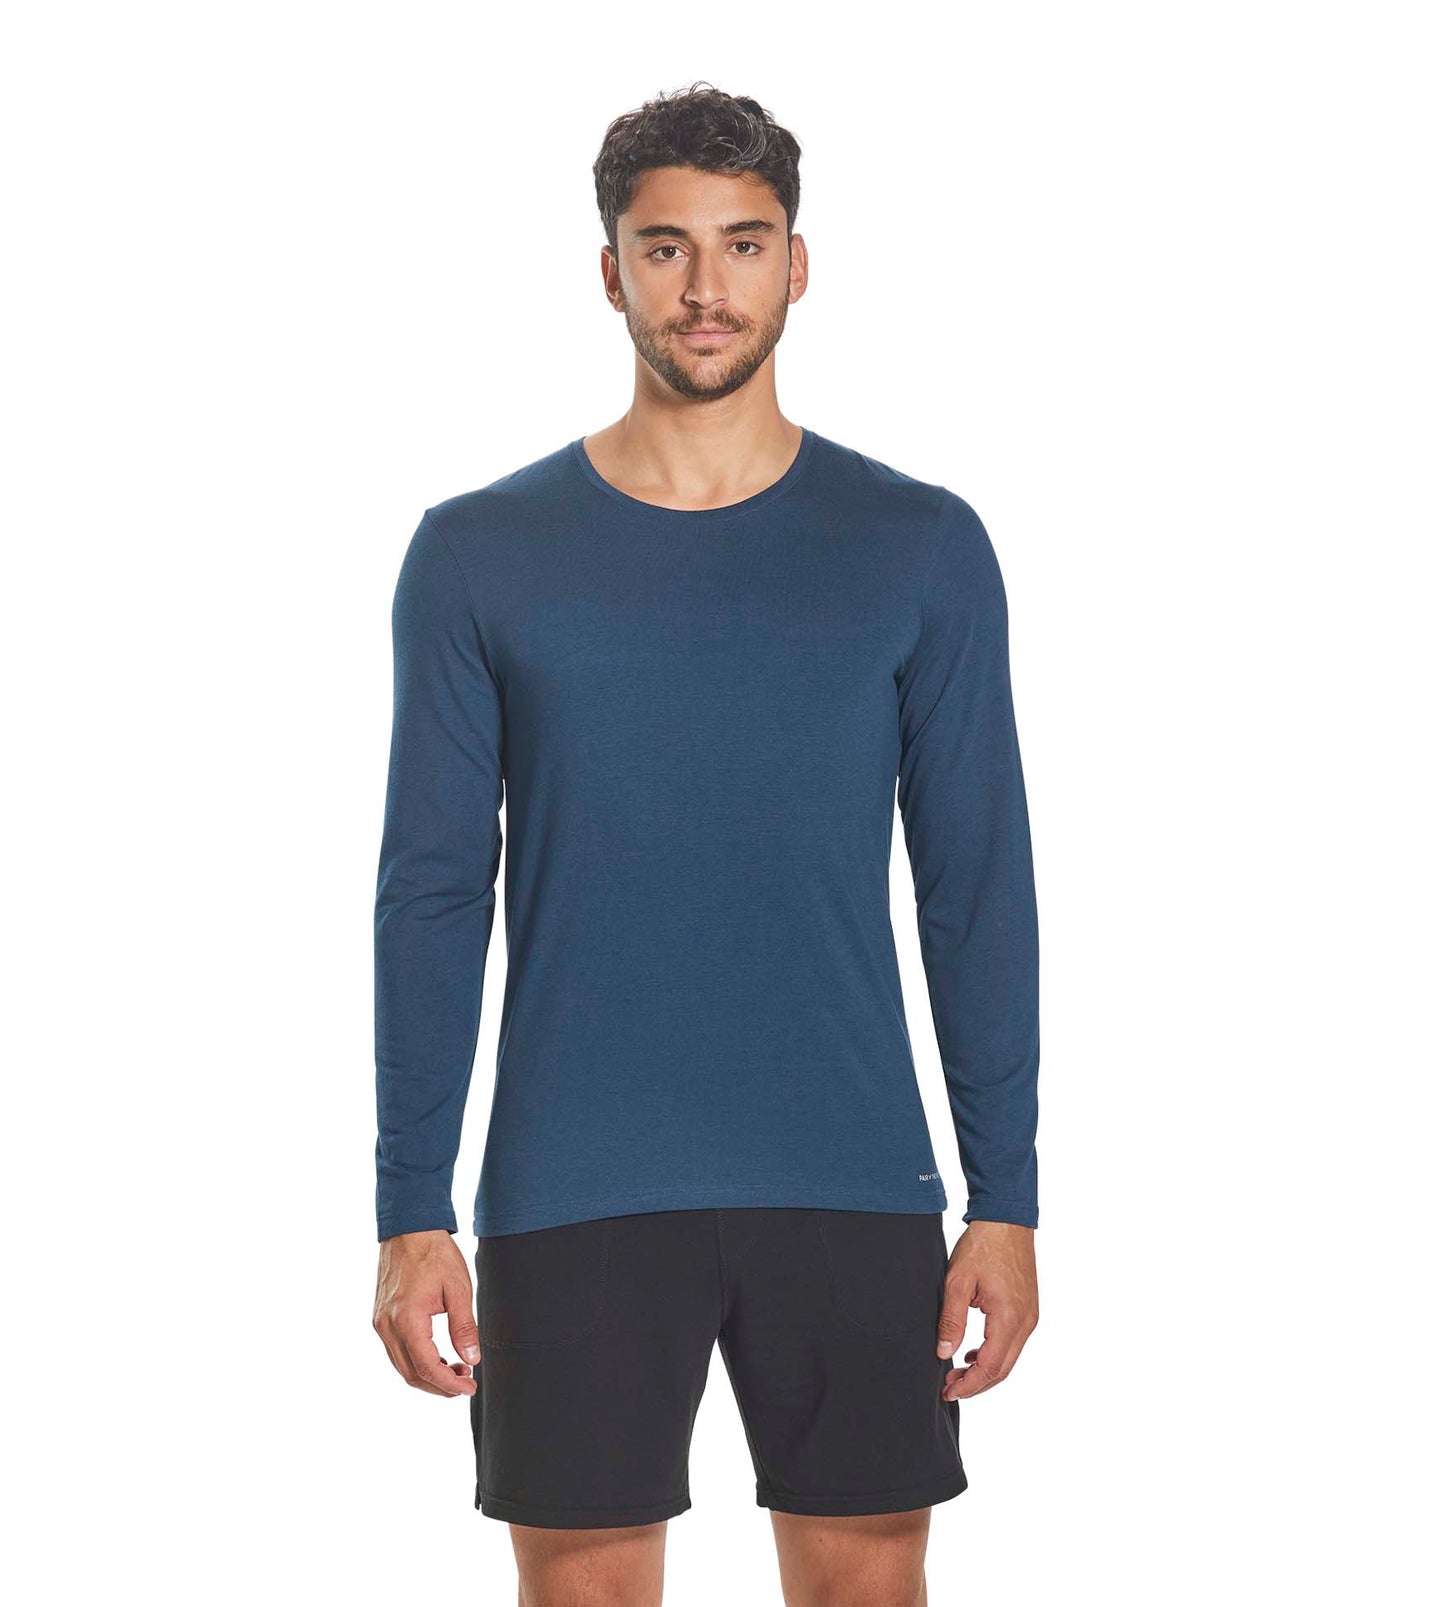 SuperSoft Long Sleeve Crew Neck Tee